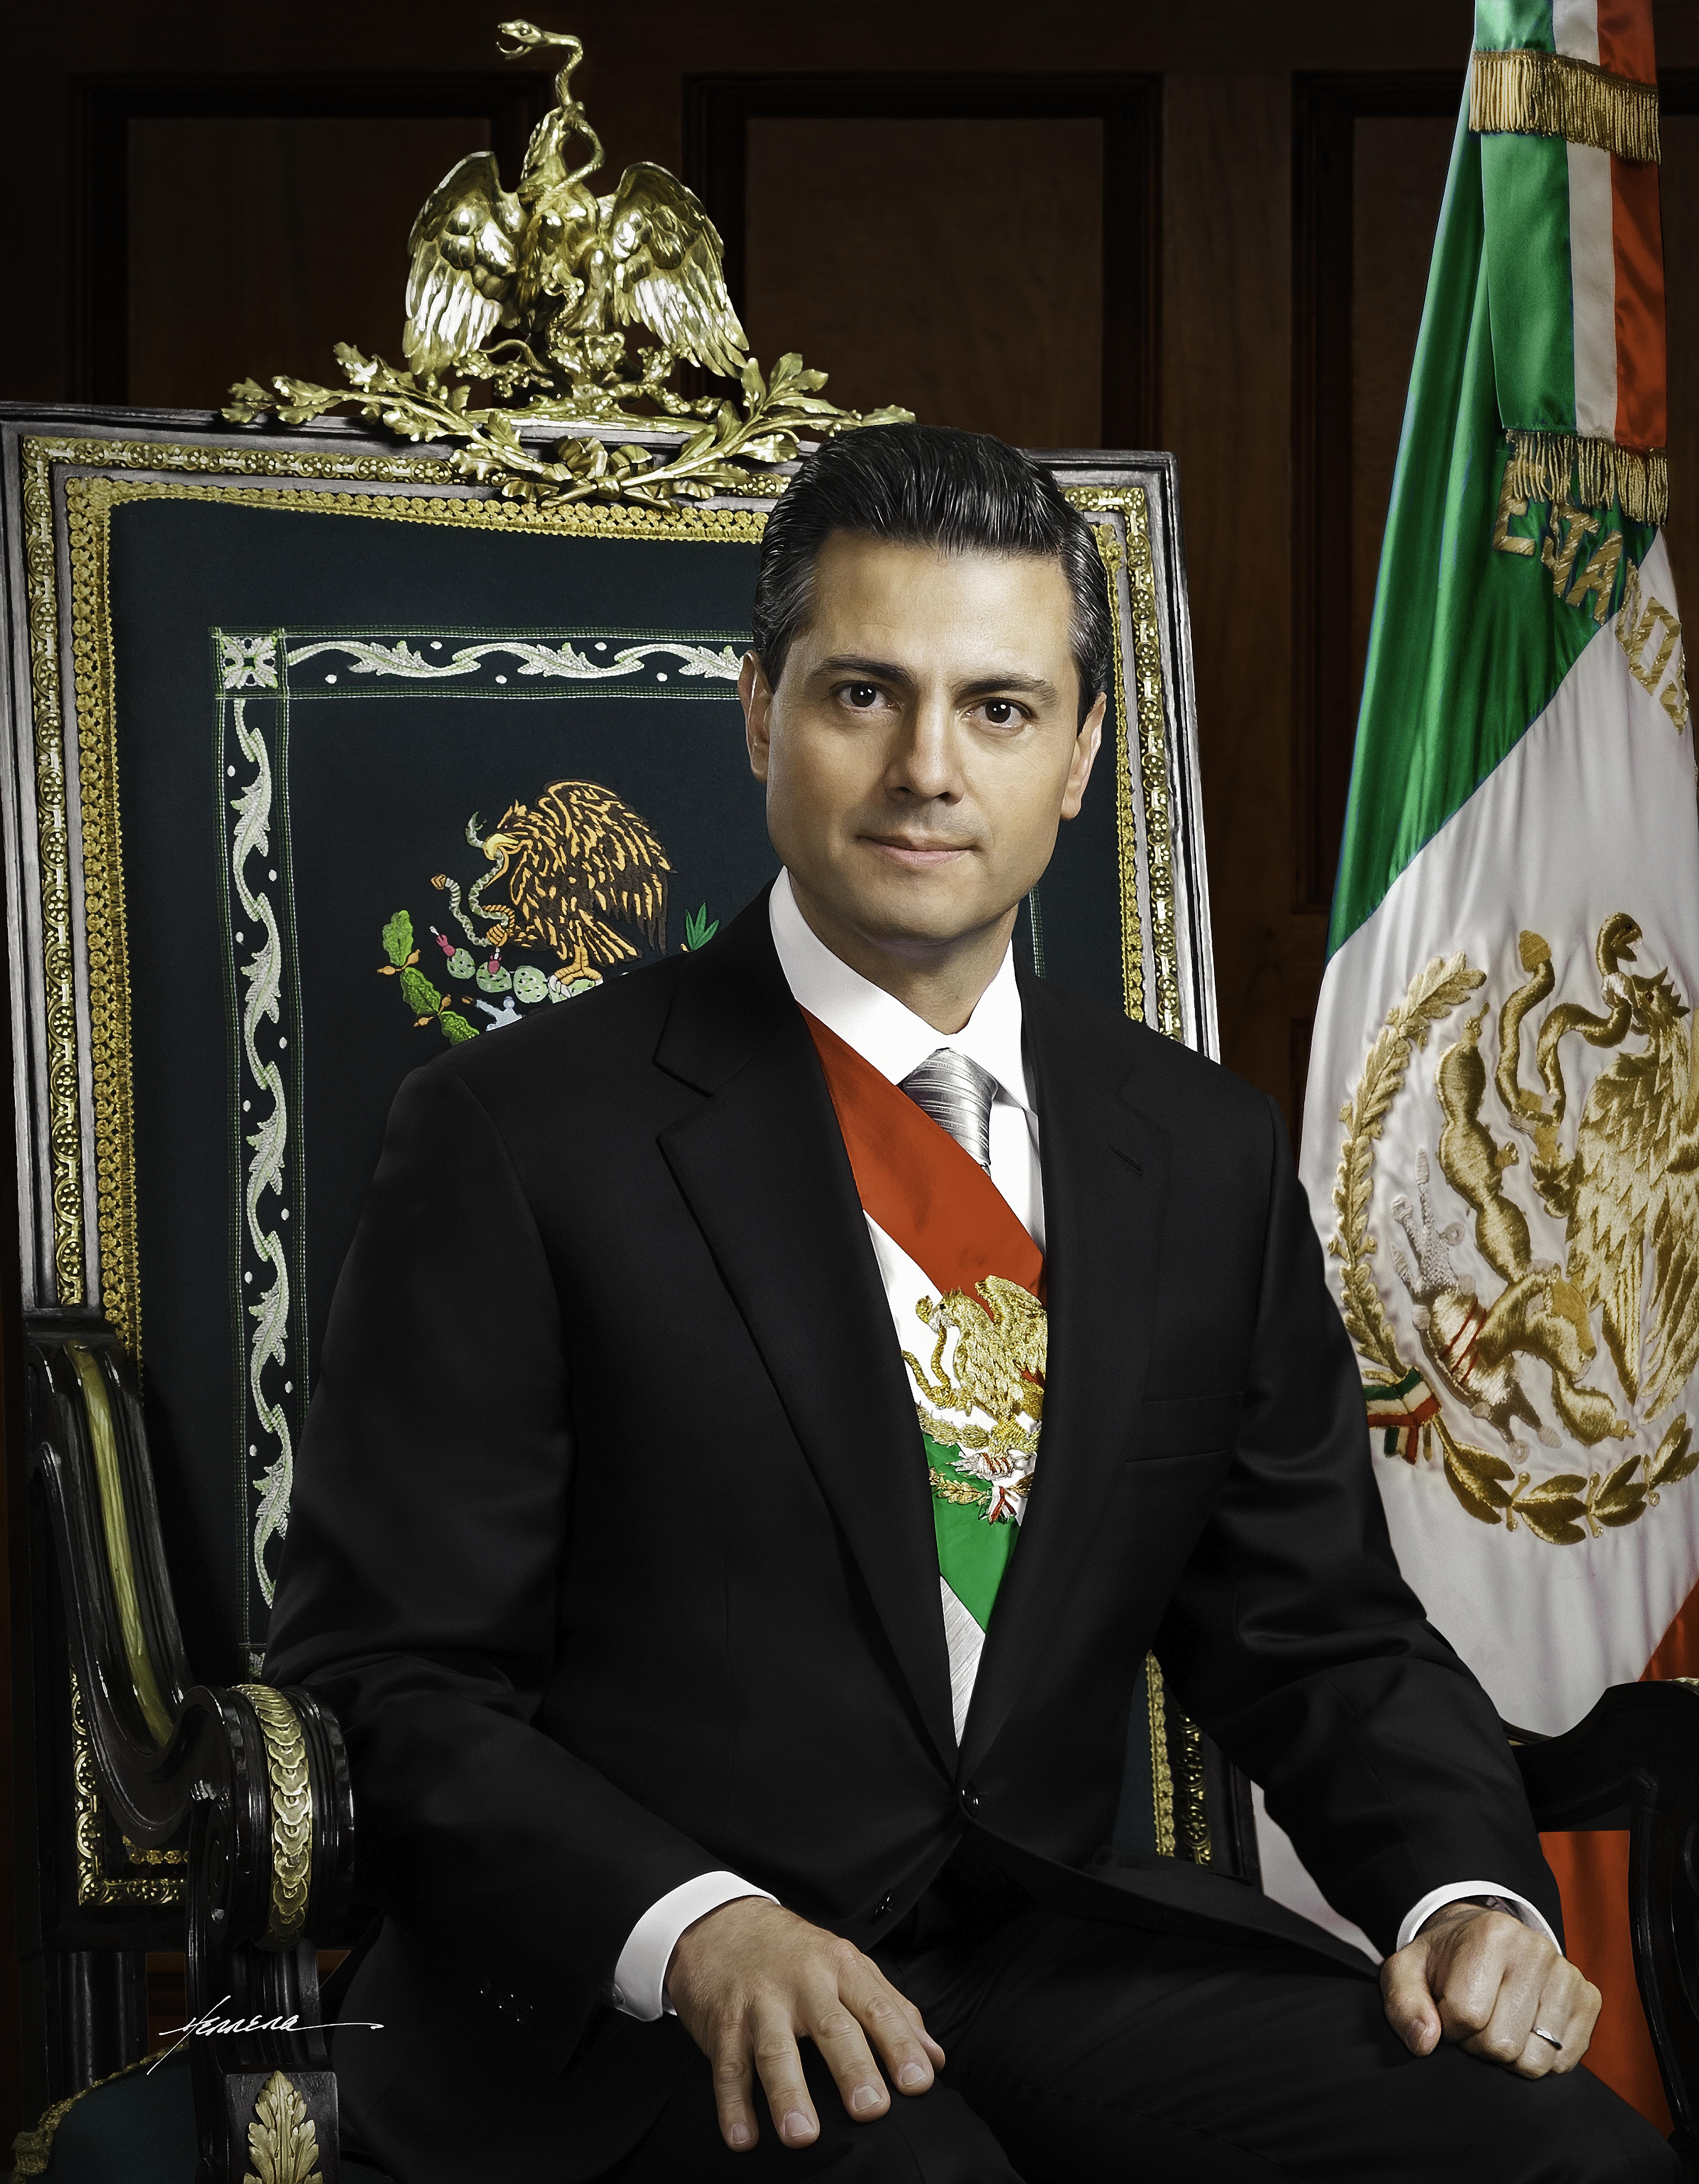 By PresidenciaMX 2012-2018 - Own work, CC BY-SA 3.0, https://commons.wikimedia.org/w/index.php?curid=26225206